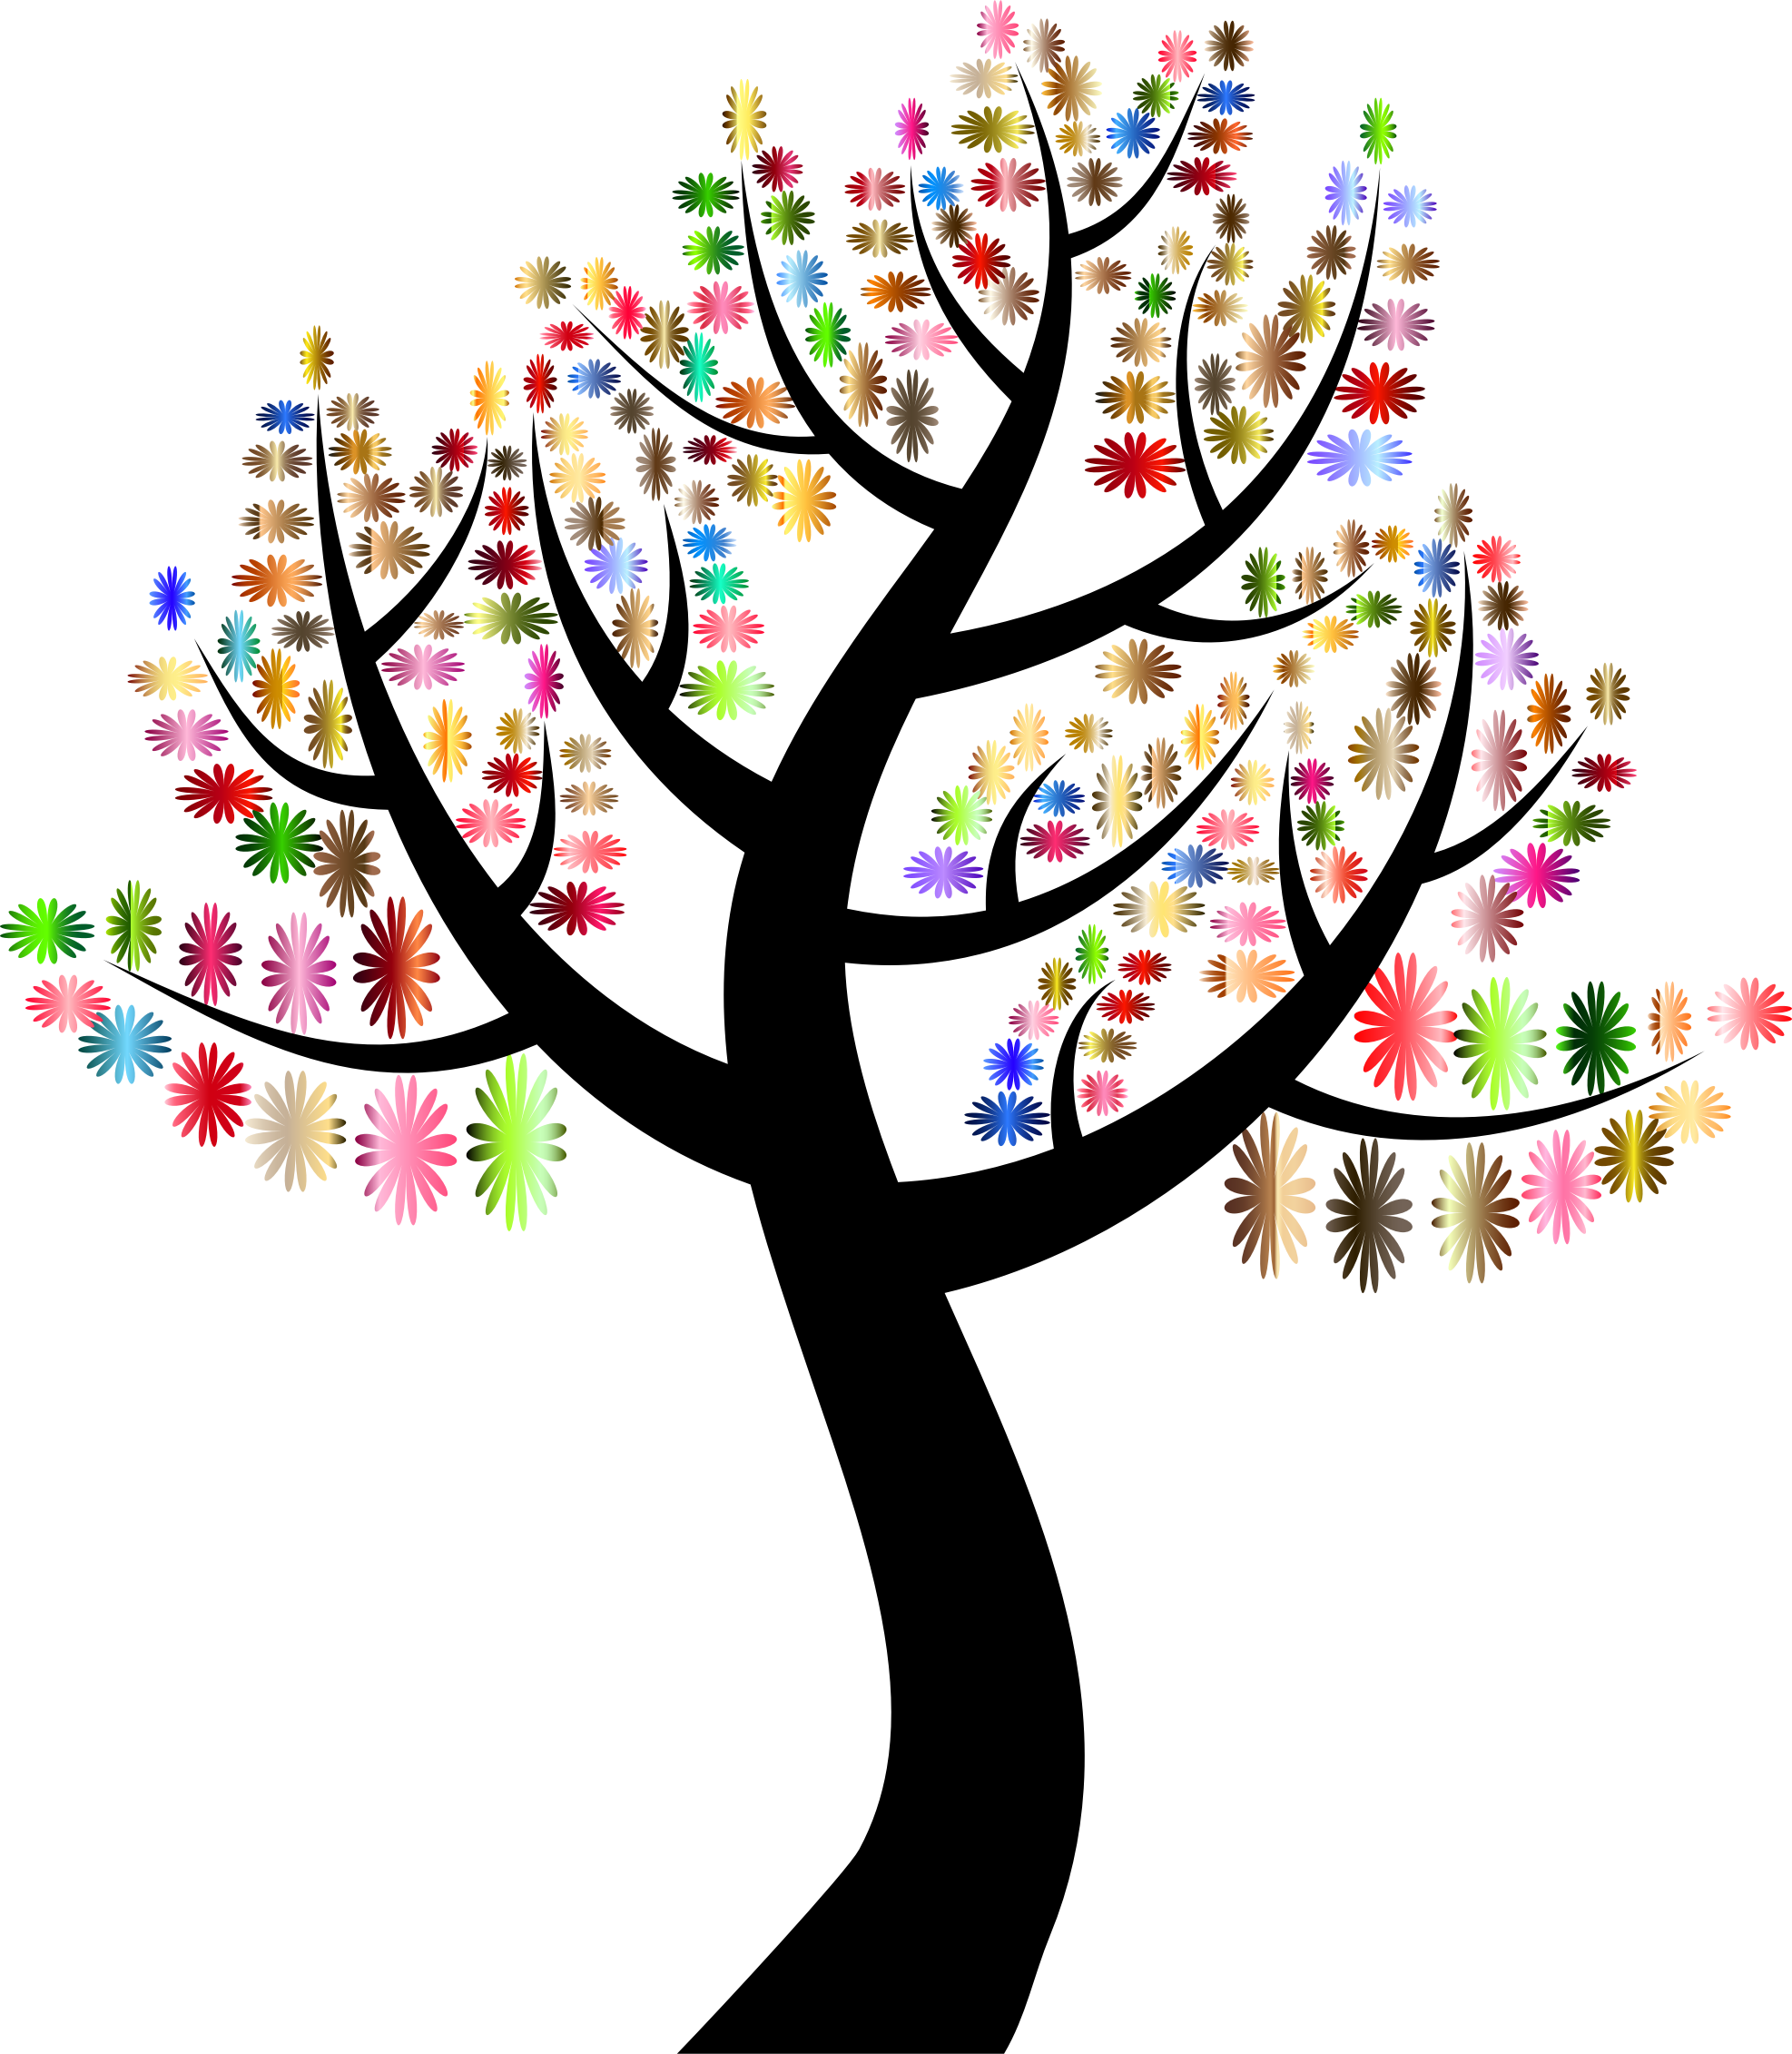 Simple Flowers Tree - Tree With Colorful Leaves (1974x2262)